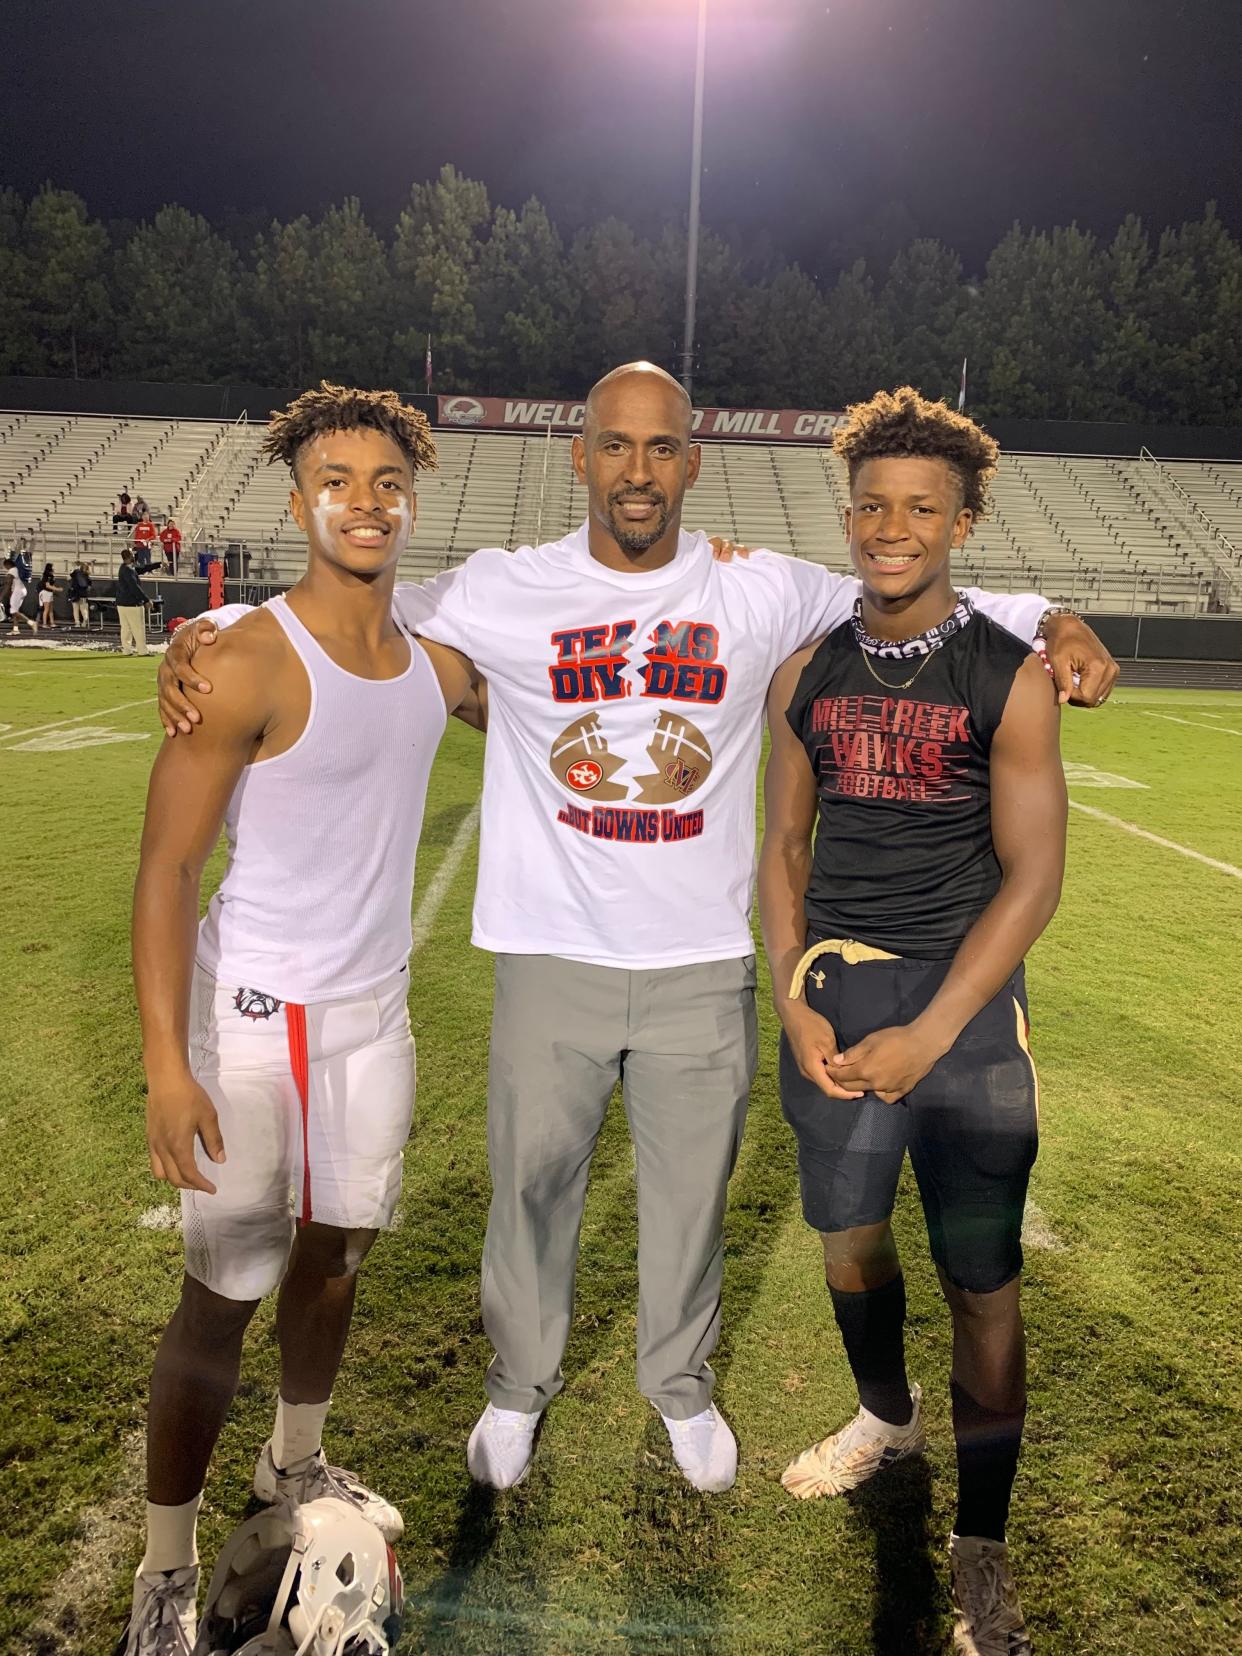 The Downs brothers attended different high schools, but they got to face each other one time when Josh's North Gwinnett beat Caleb's Mill Creek during Josh's senior season in 2019.